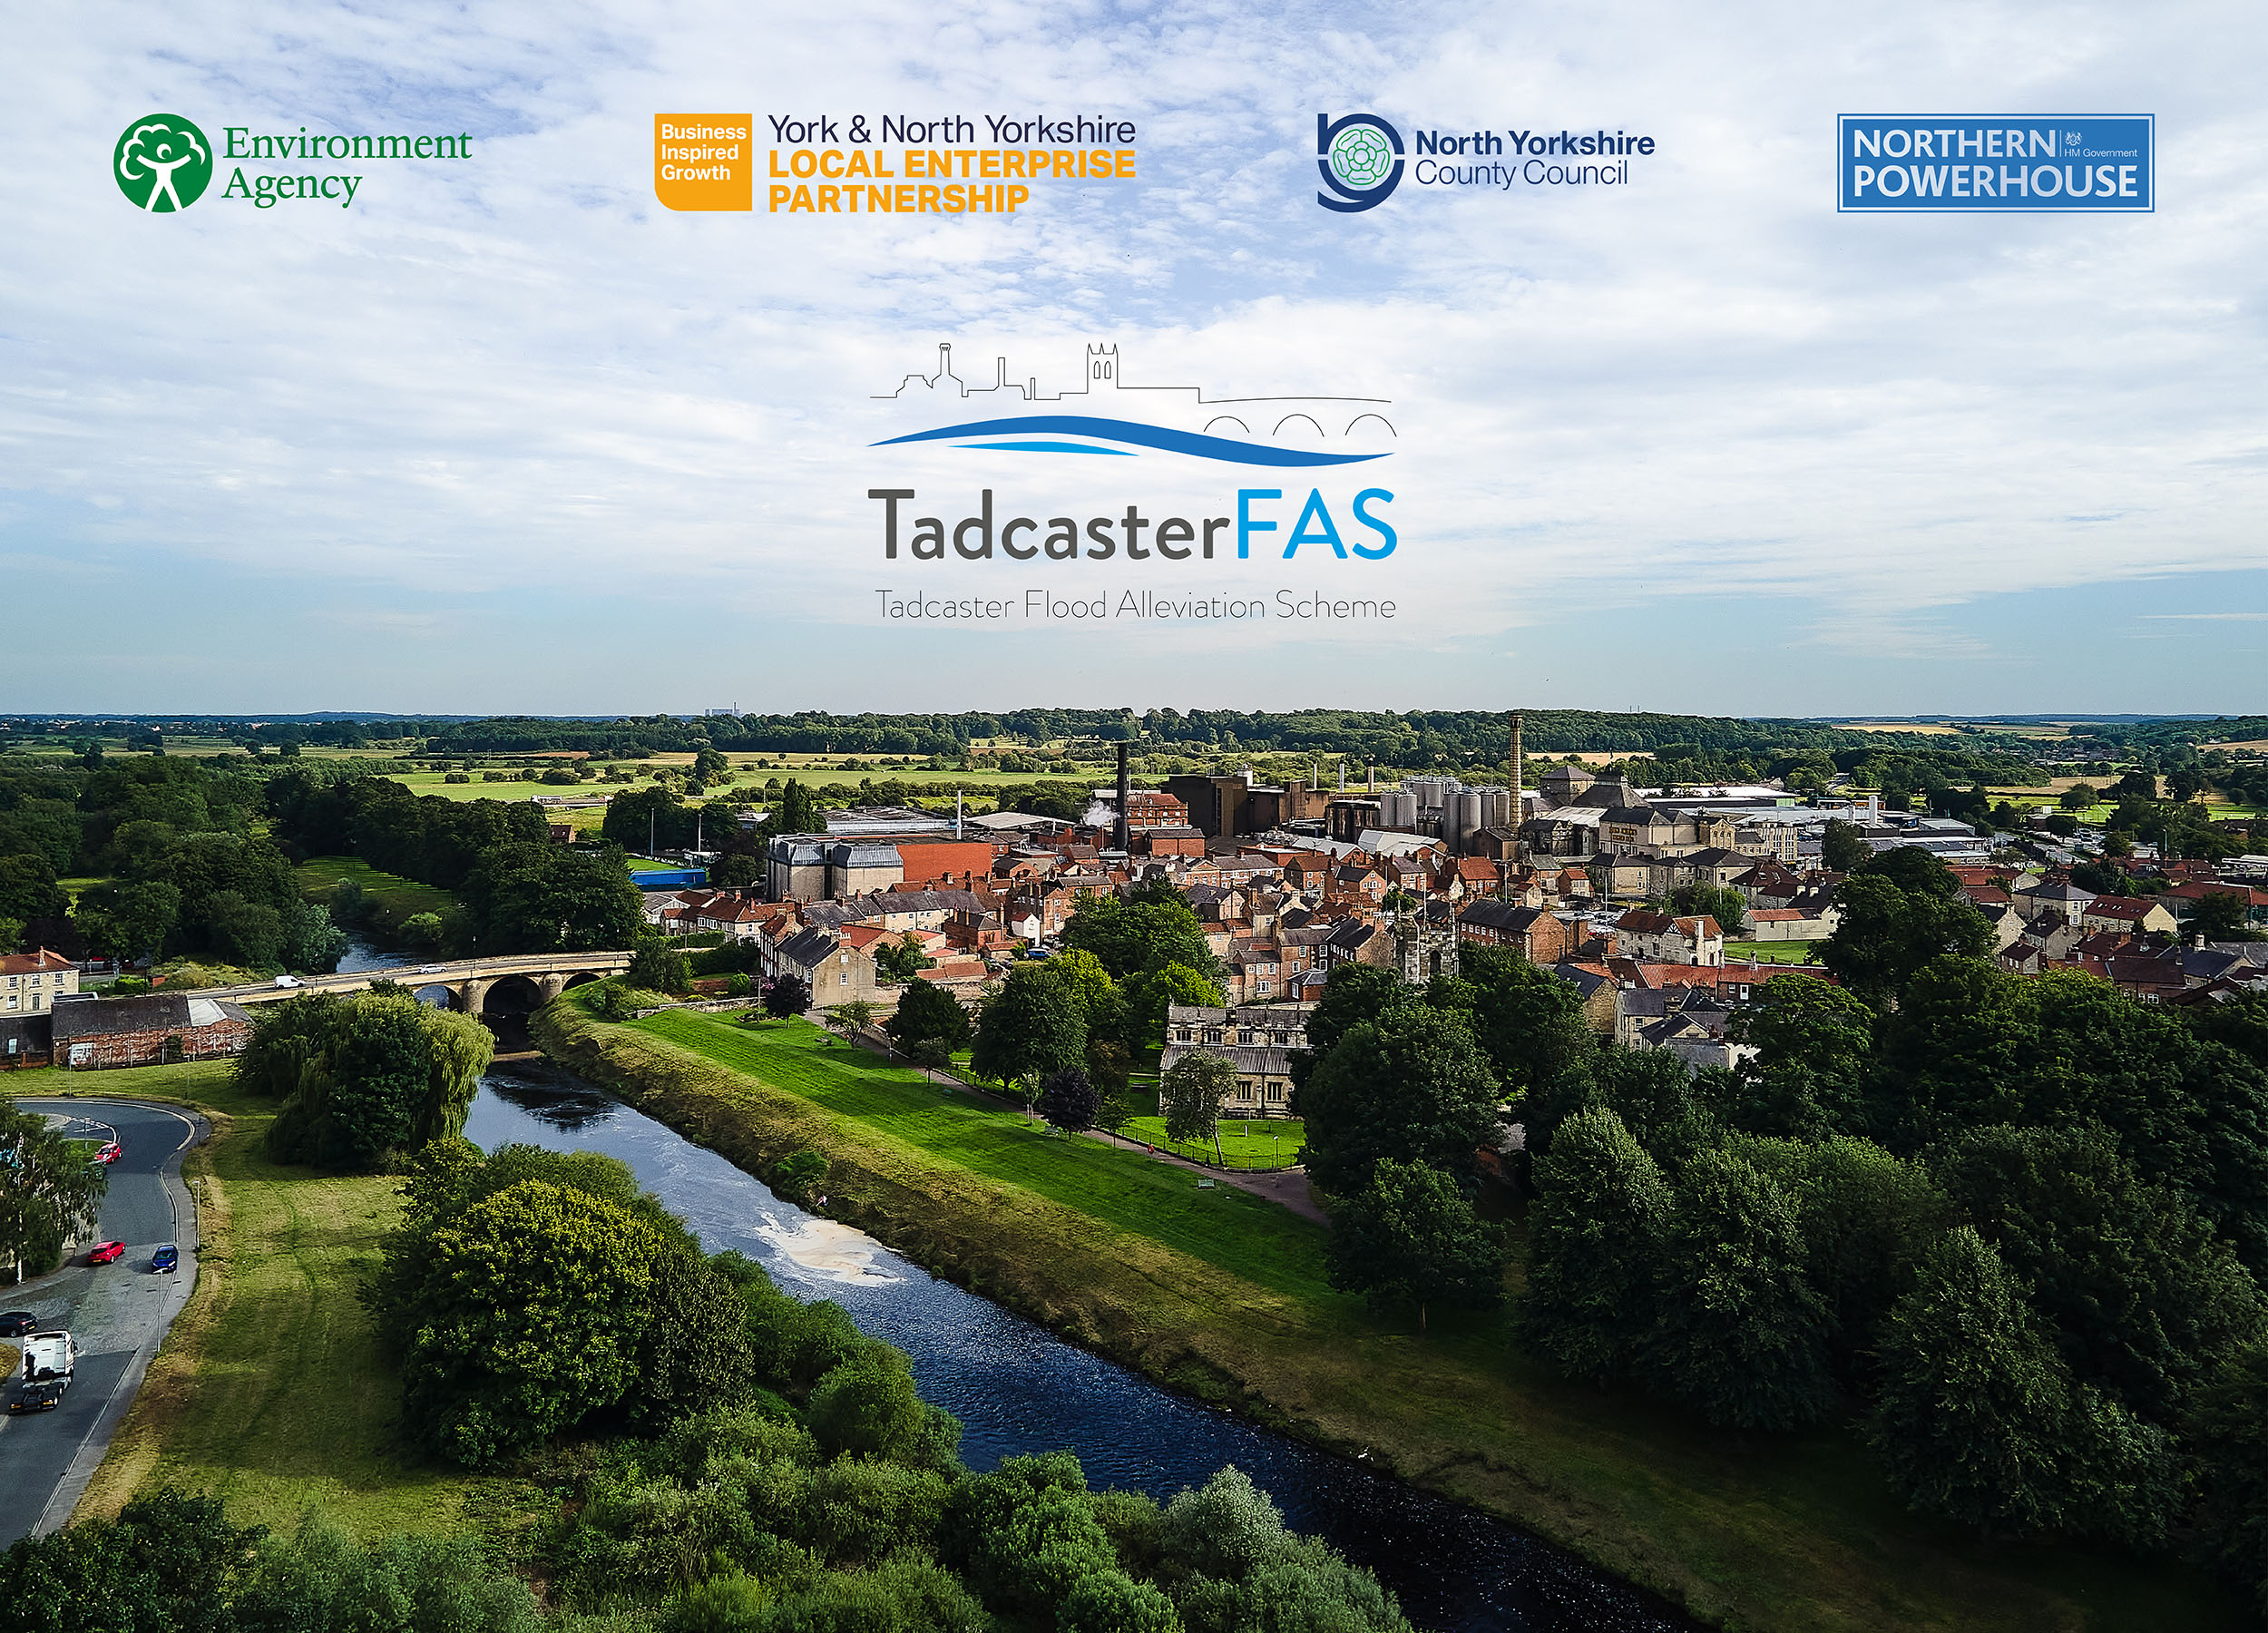 Tadcaster FAS